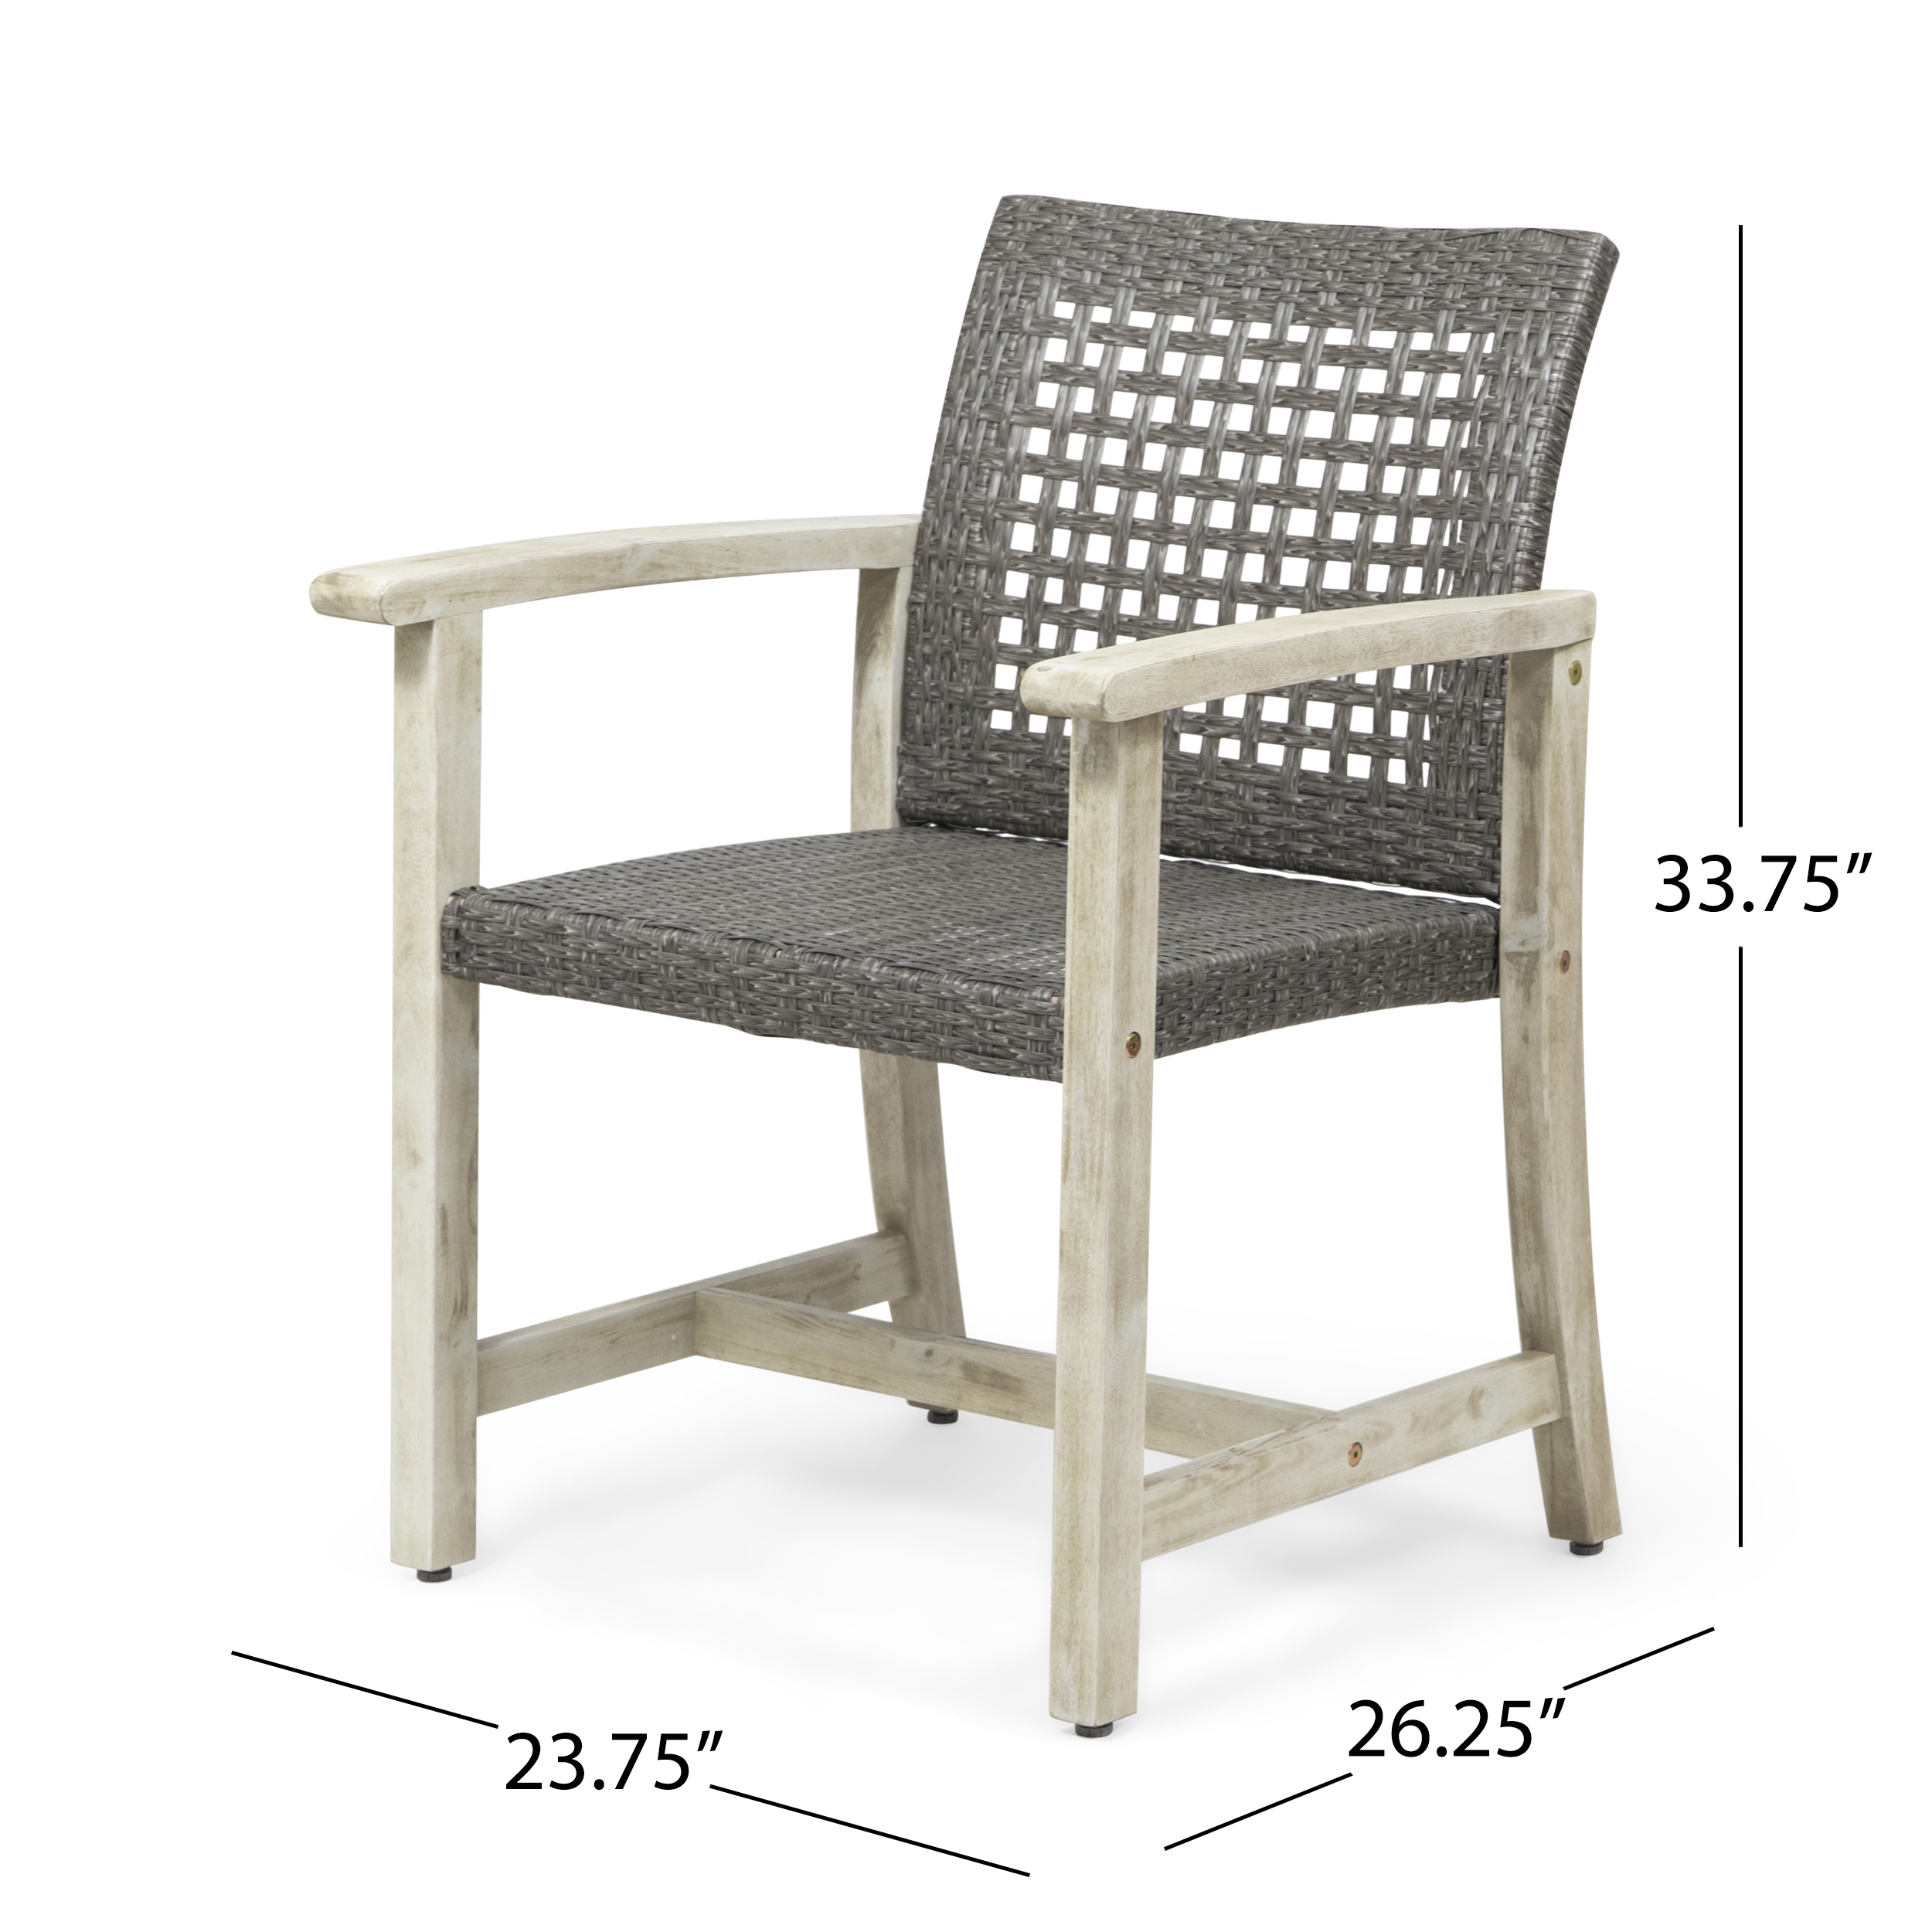 GDF Studio Beacher Outdoor Acacia Wood and Wicker Dining Chair (Set of 2), Light Gray Wash and Mix Black - image 2 of 11